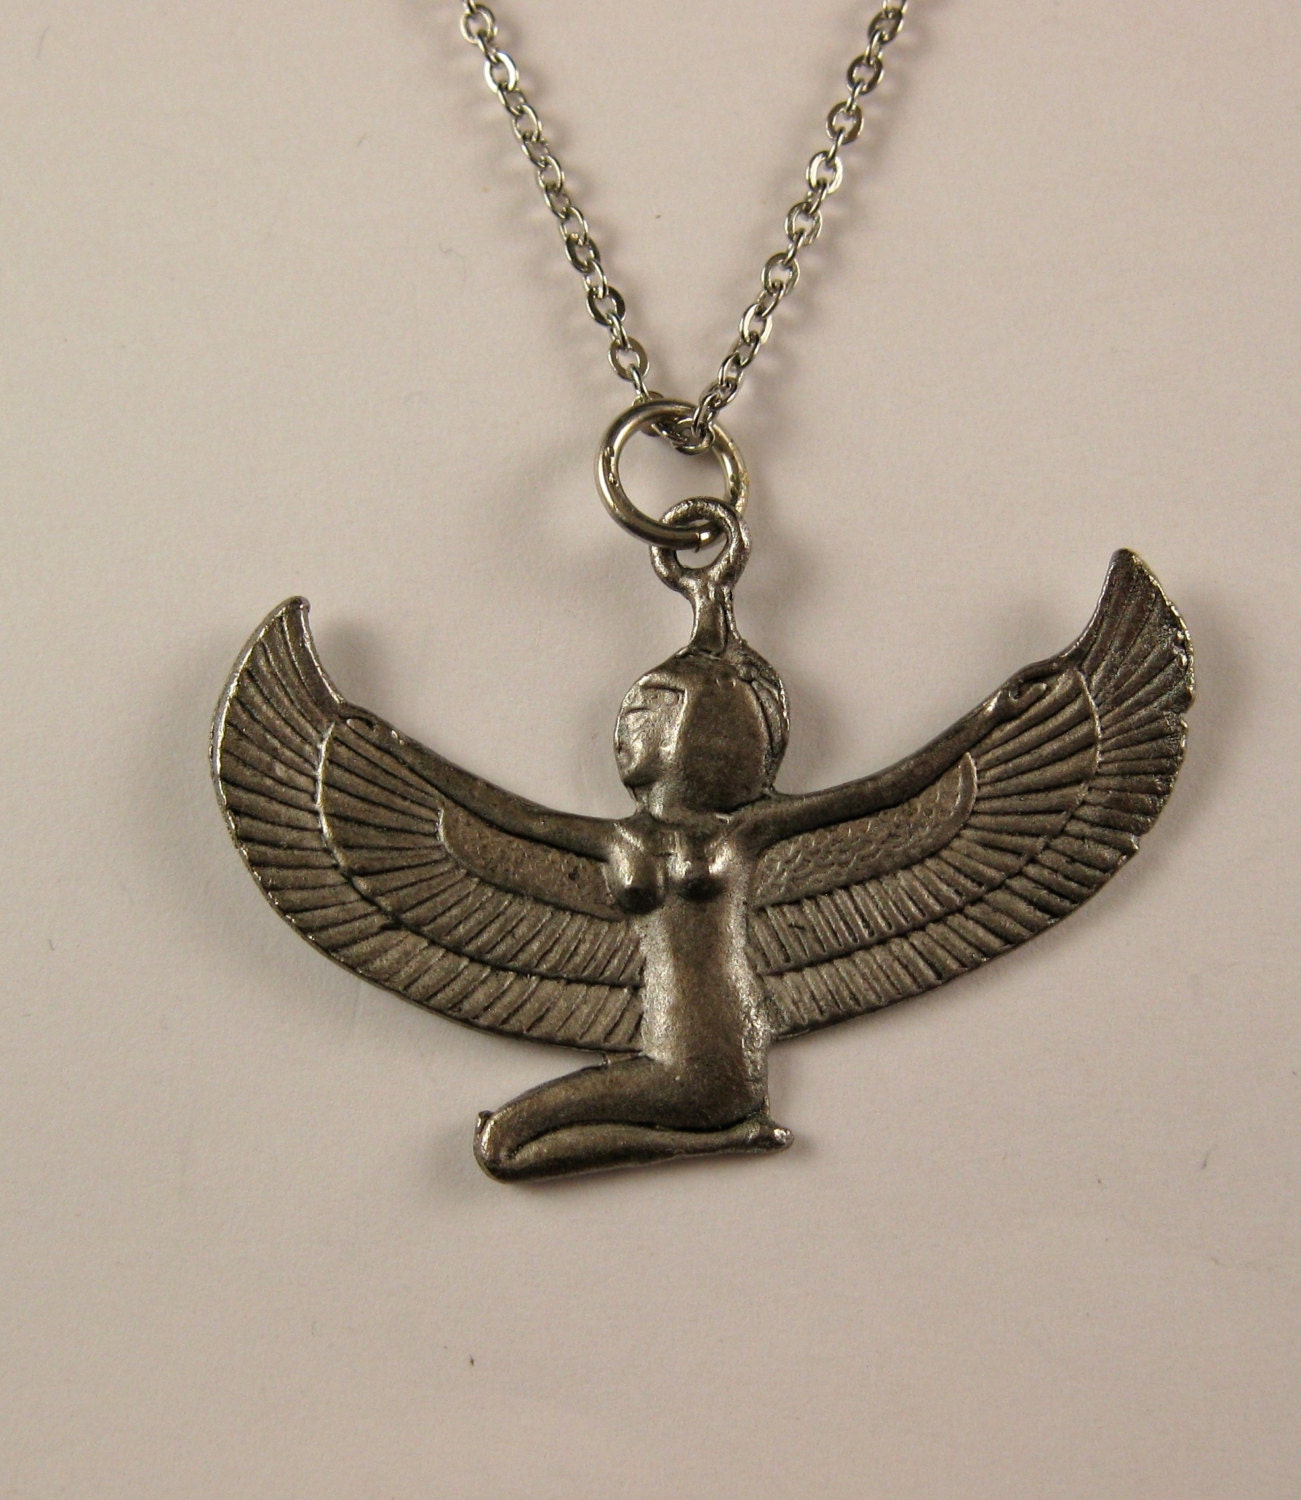 VINTAGE EGYPTIAN ISIS goddess charm silver tone by JewelryBySusie